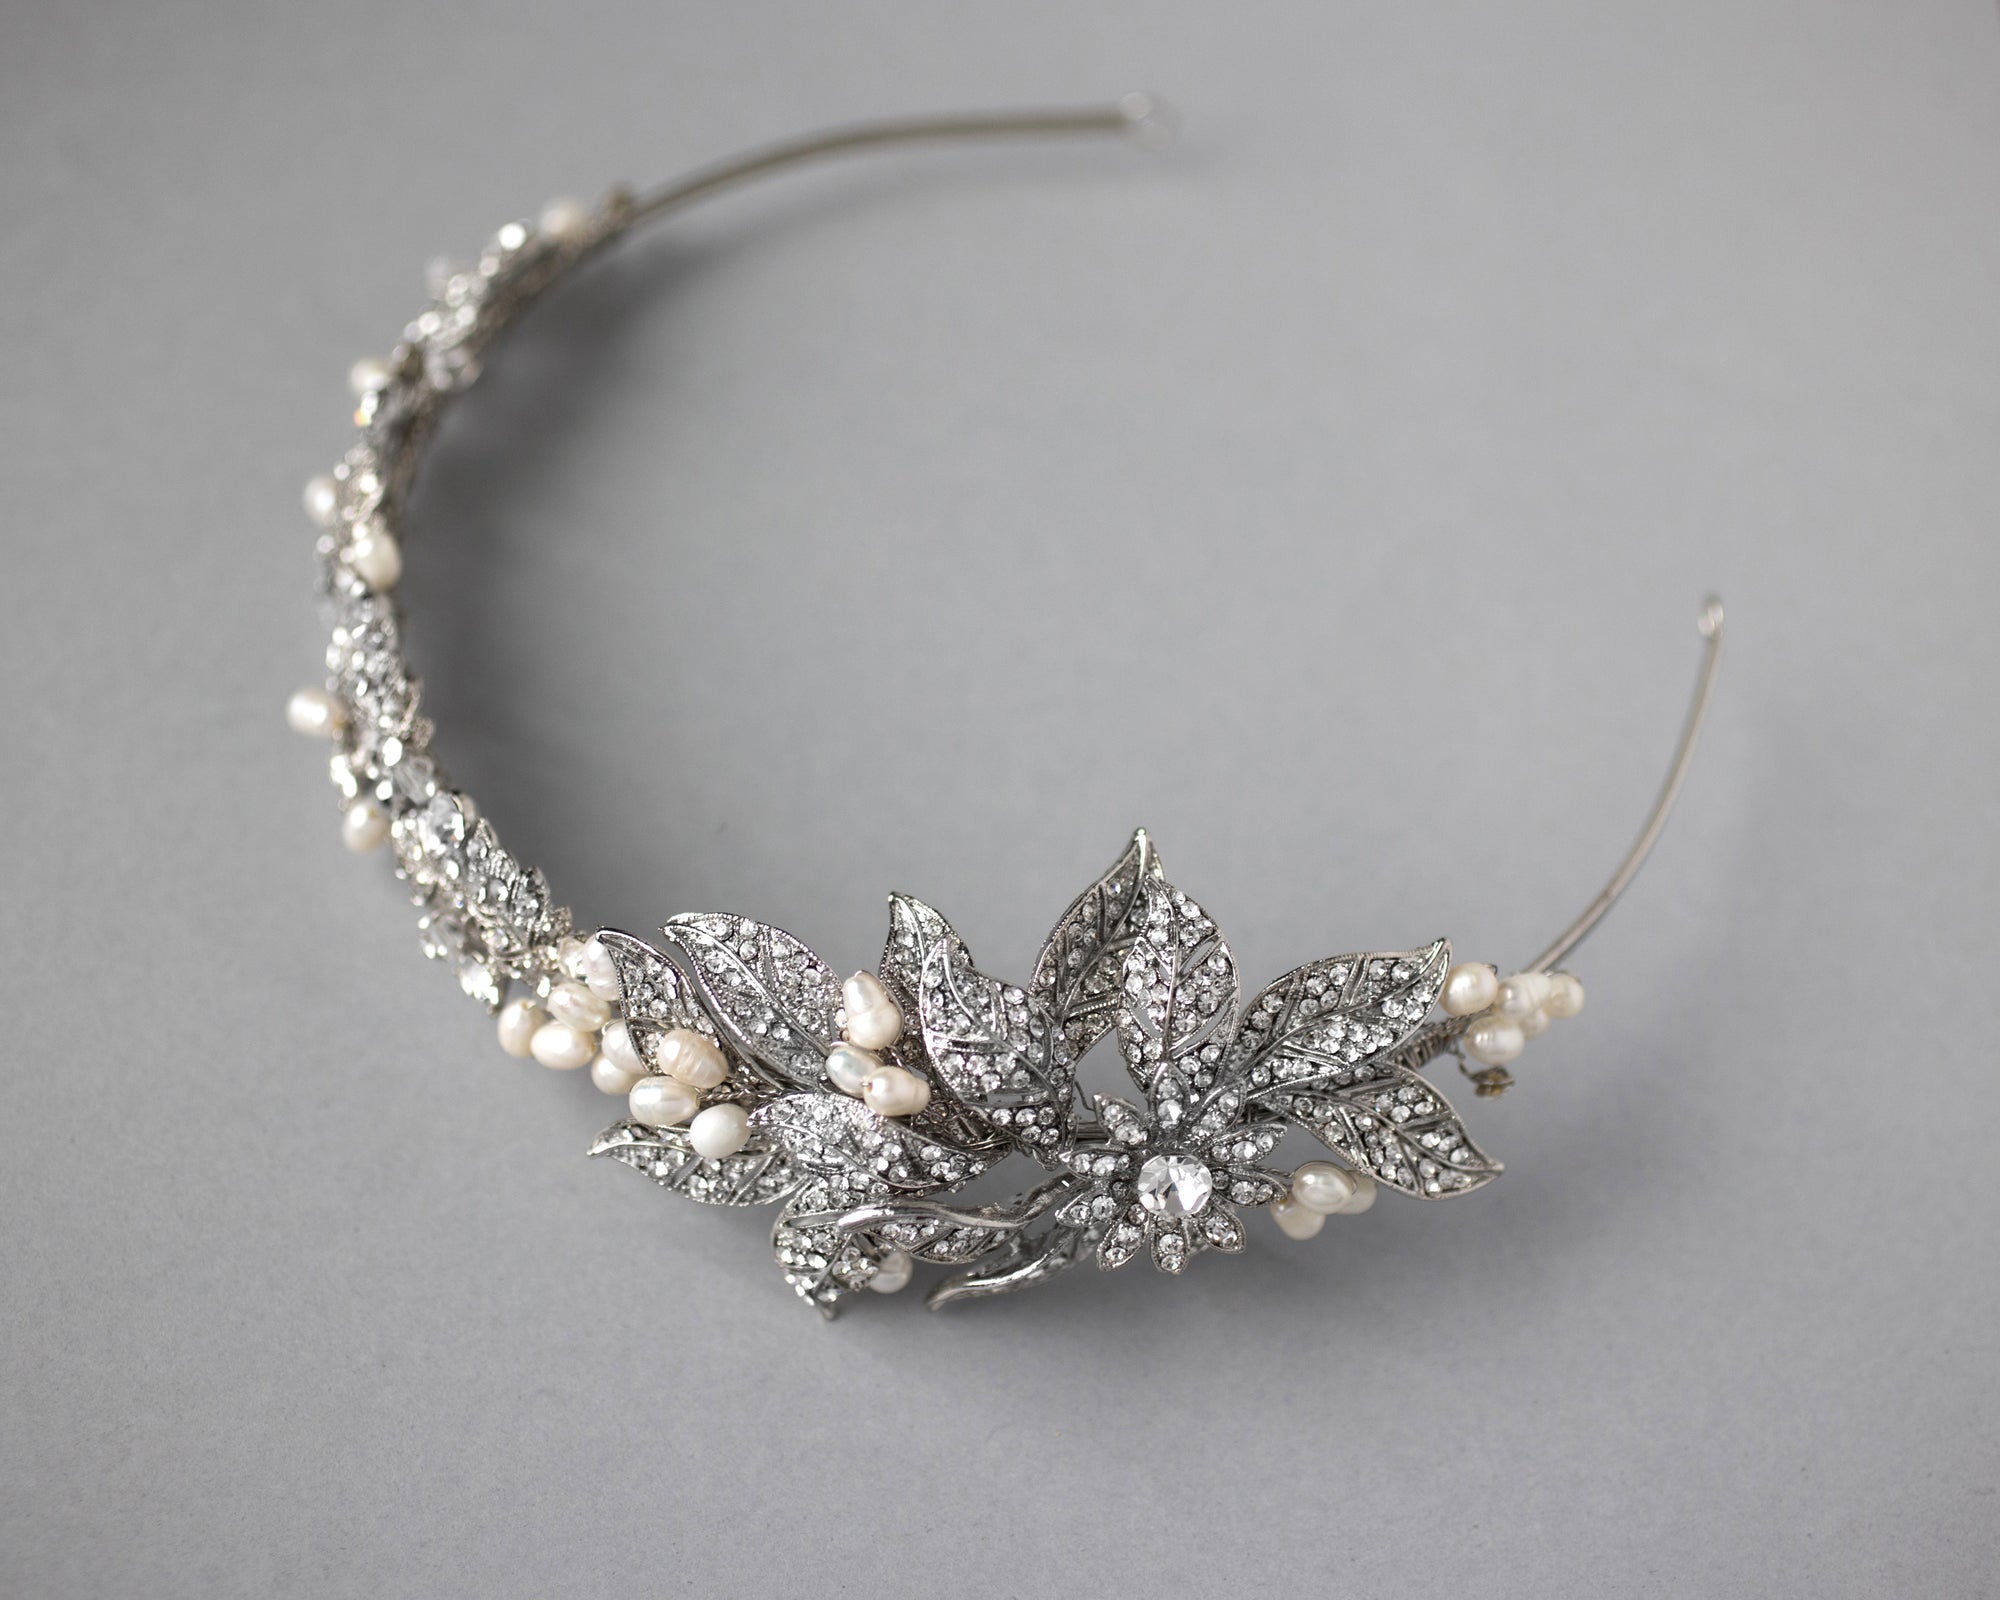 Antique Silver and Pearls Side Accent Headband - Cassandra Lynne